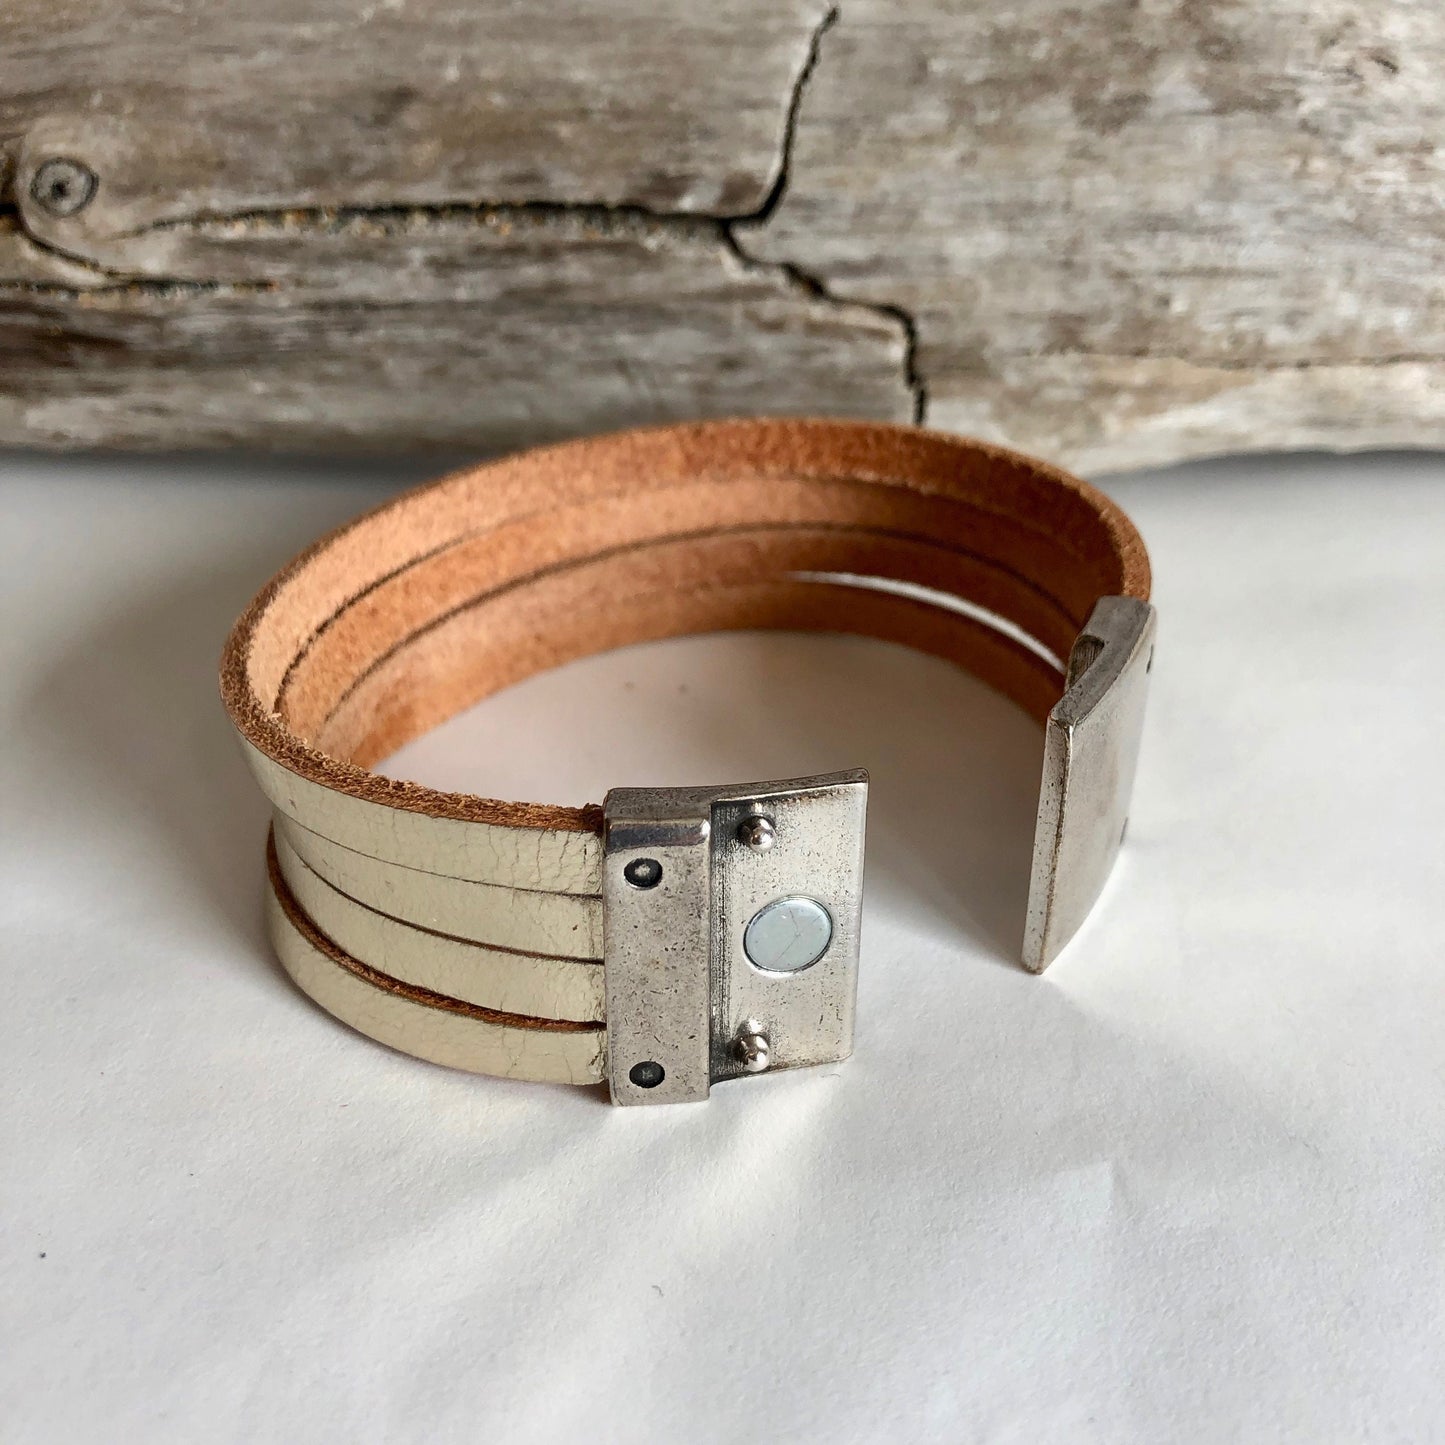 Leather bracelet, made with beautiful soft gold Italian leather, and finished with a quality silver magnetic riveted clasp.